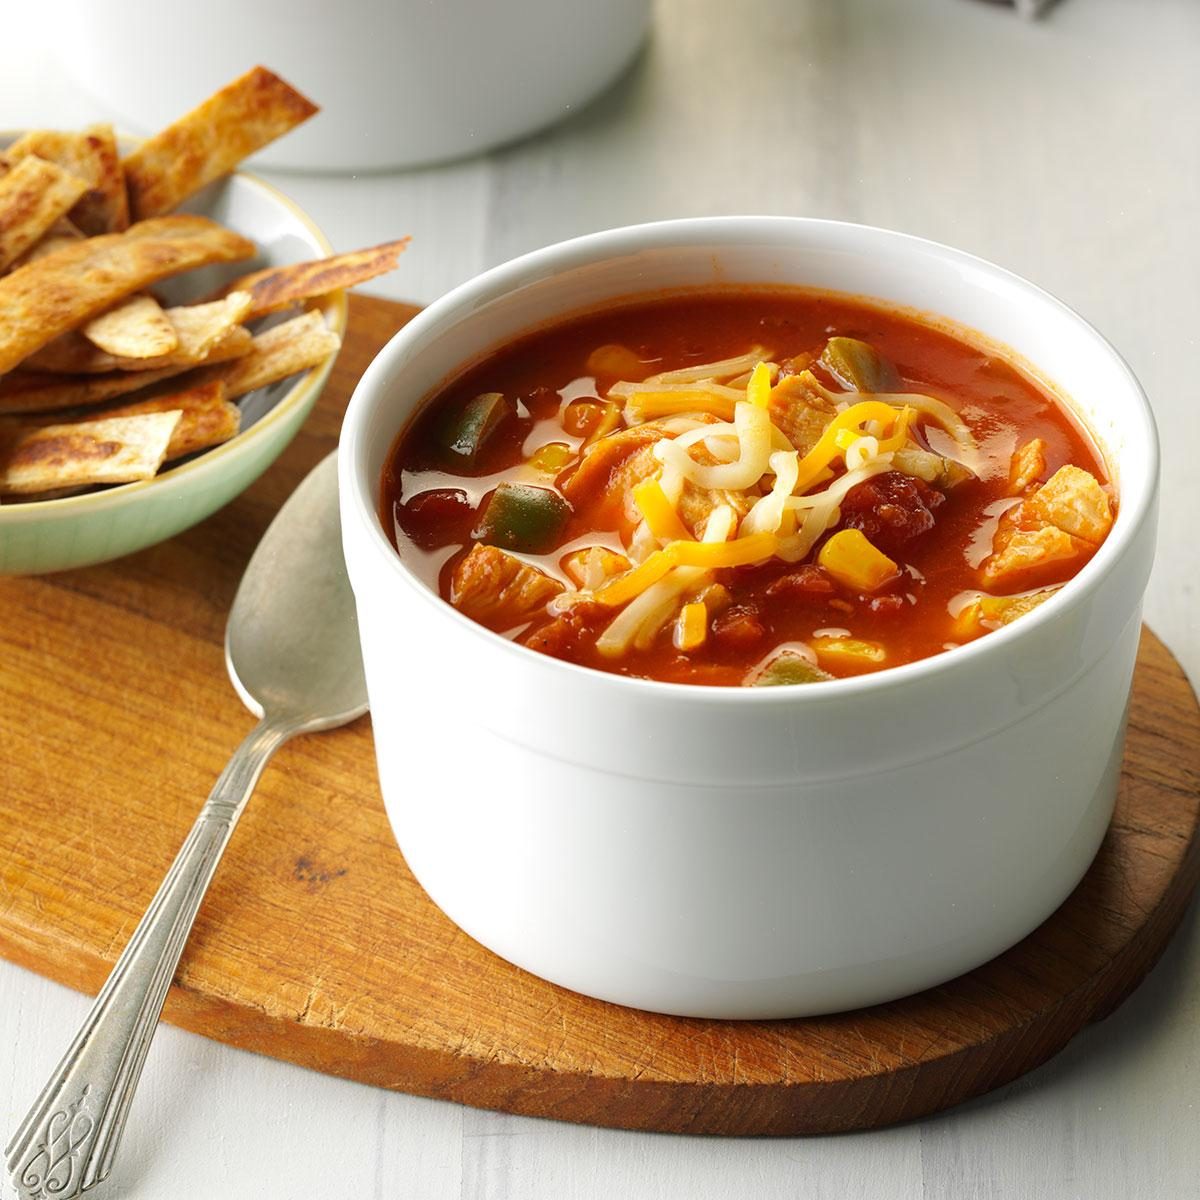 Inspired by: The Cheesecake Factory Spicy Tortilla Soup